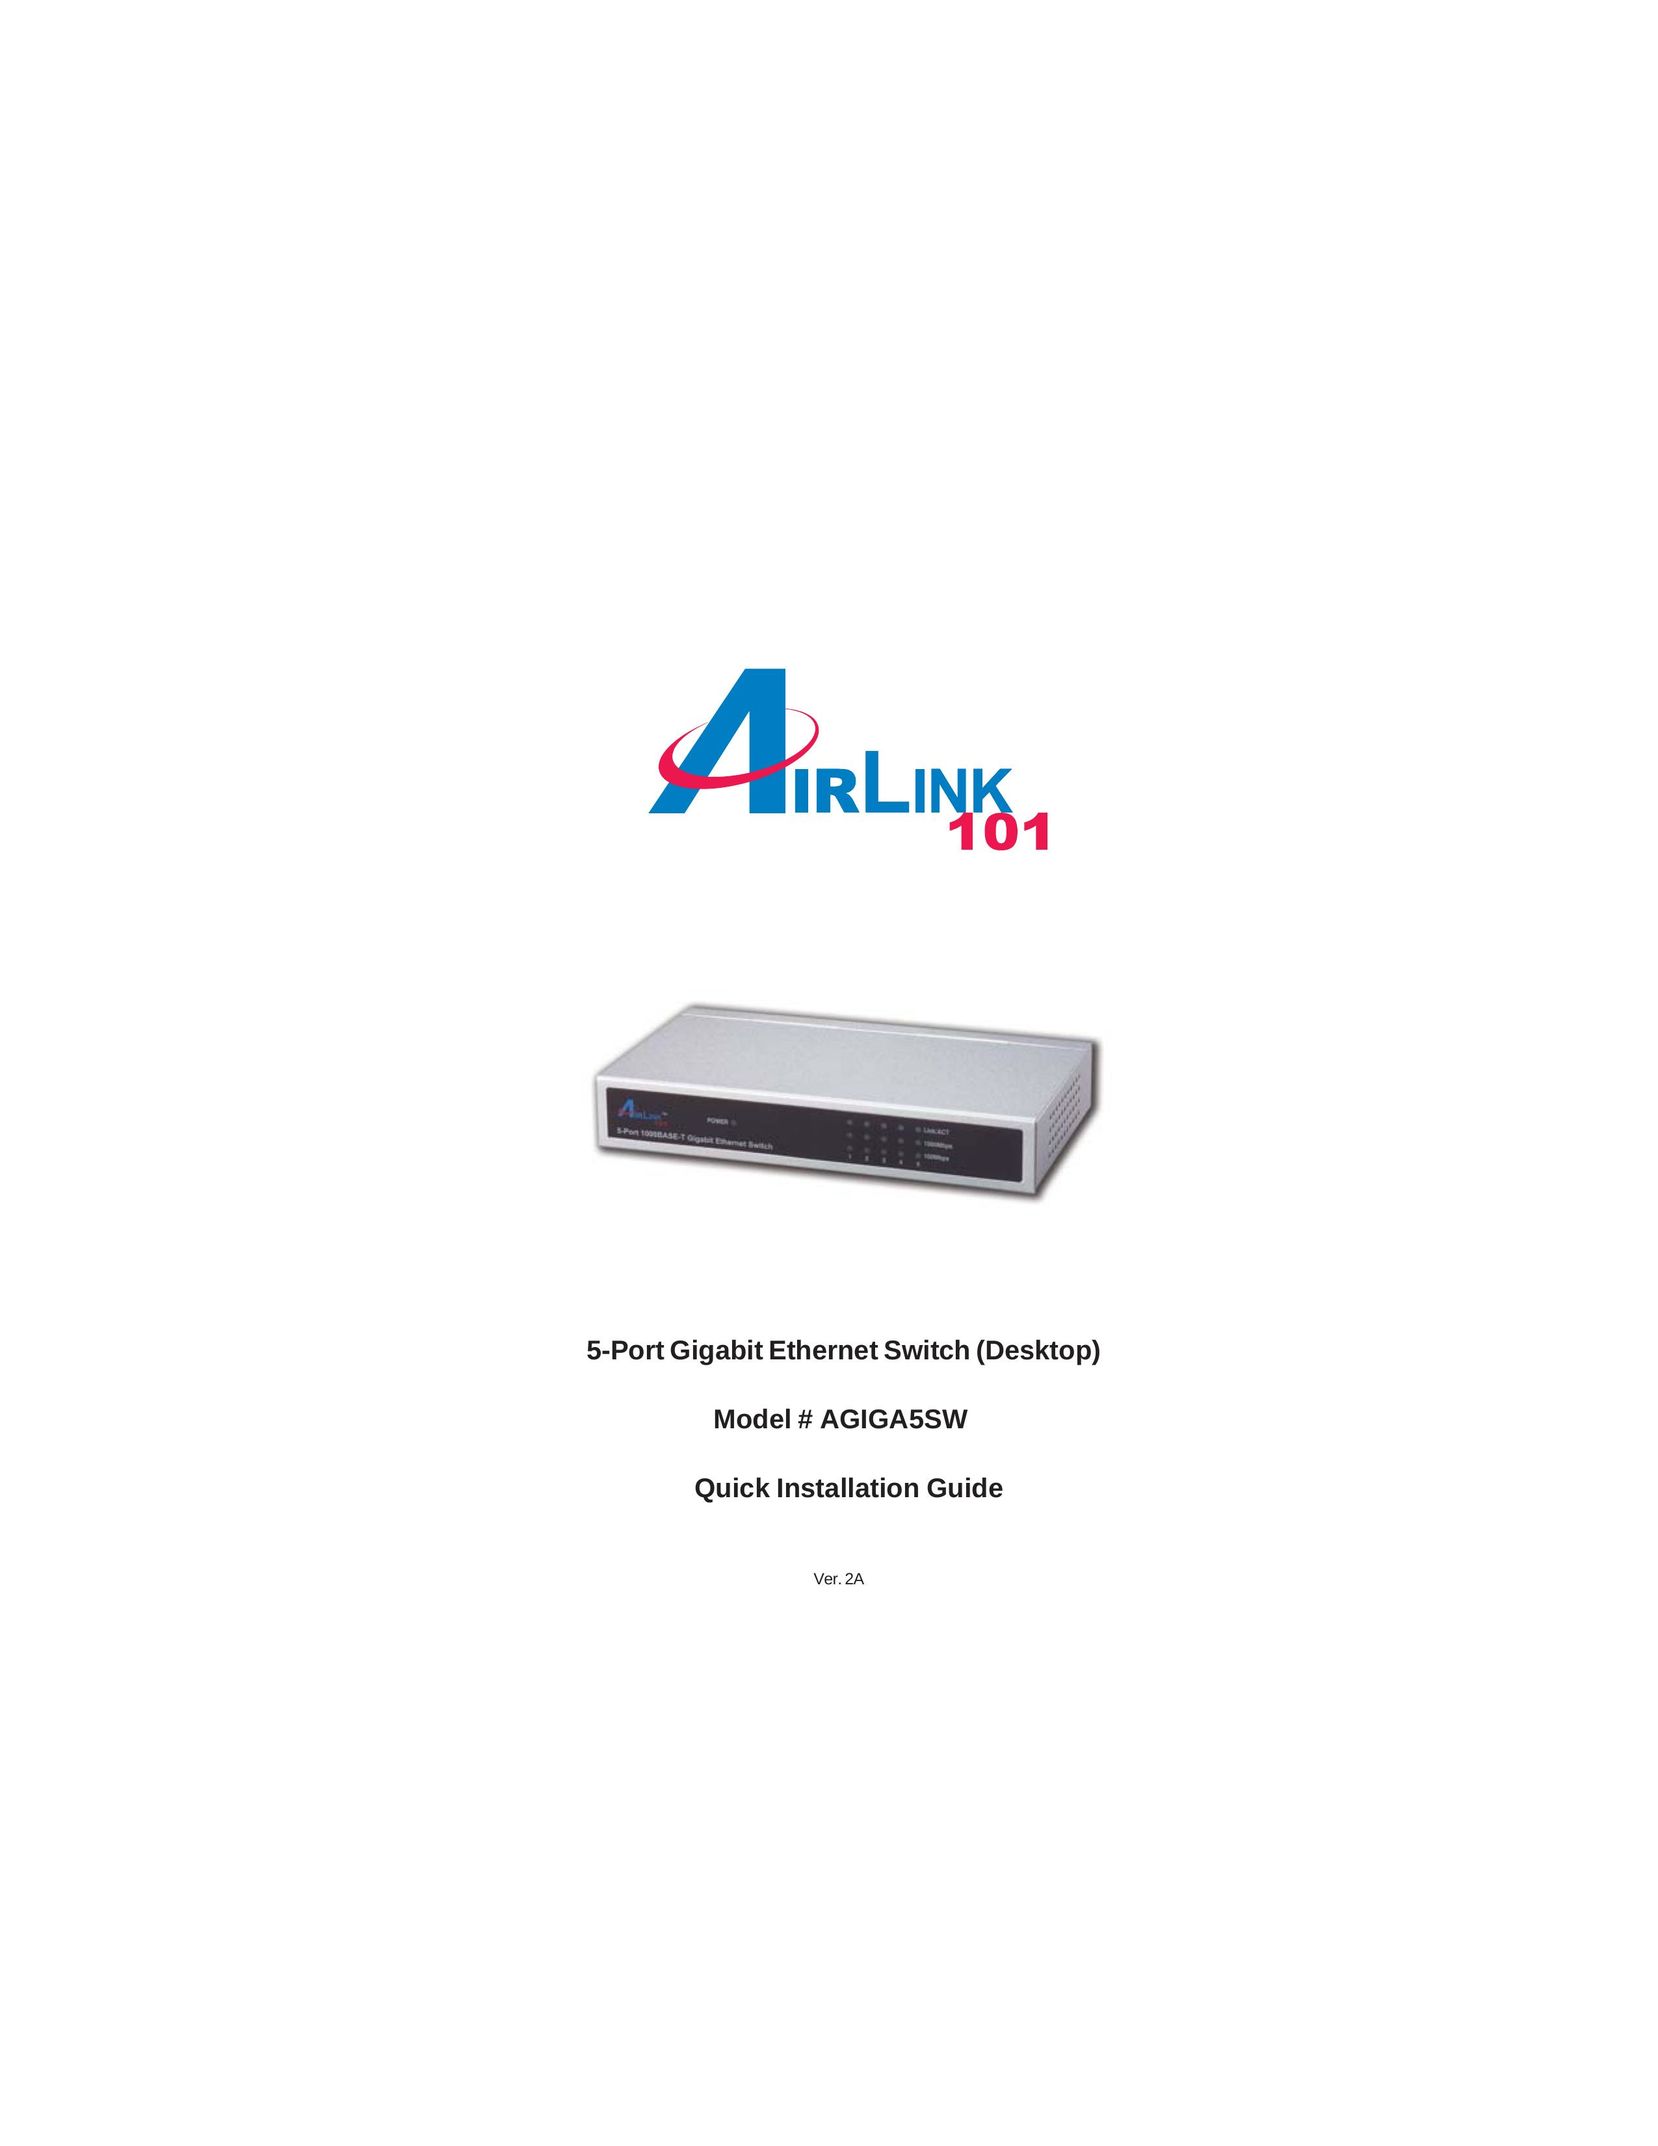 Airlink101 AGIGA5SW Switch User Manual